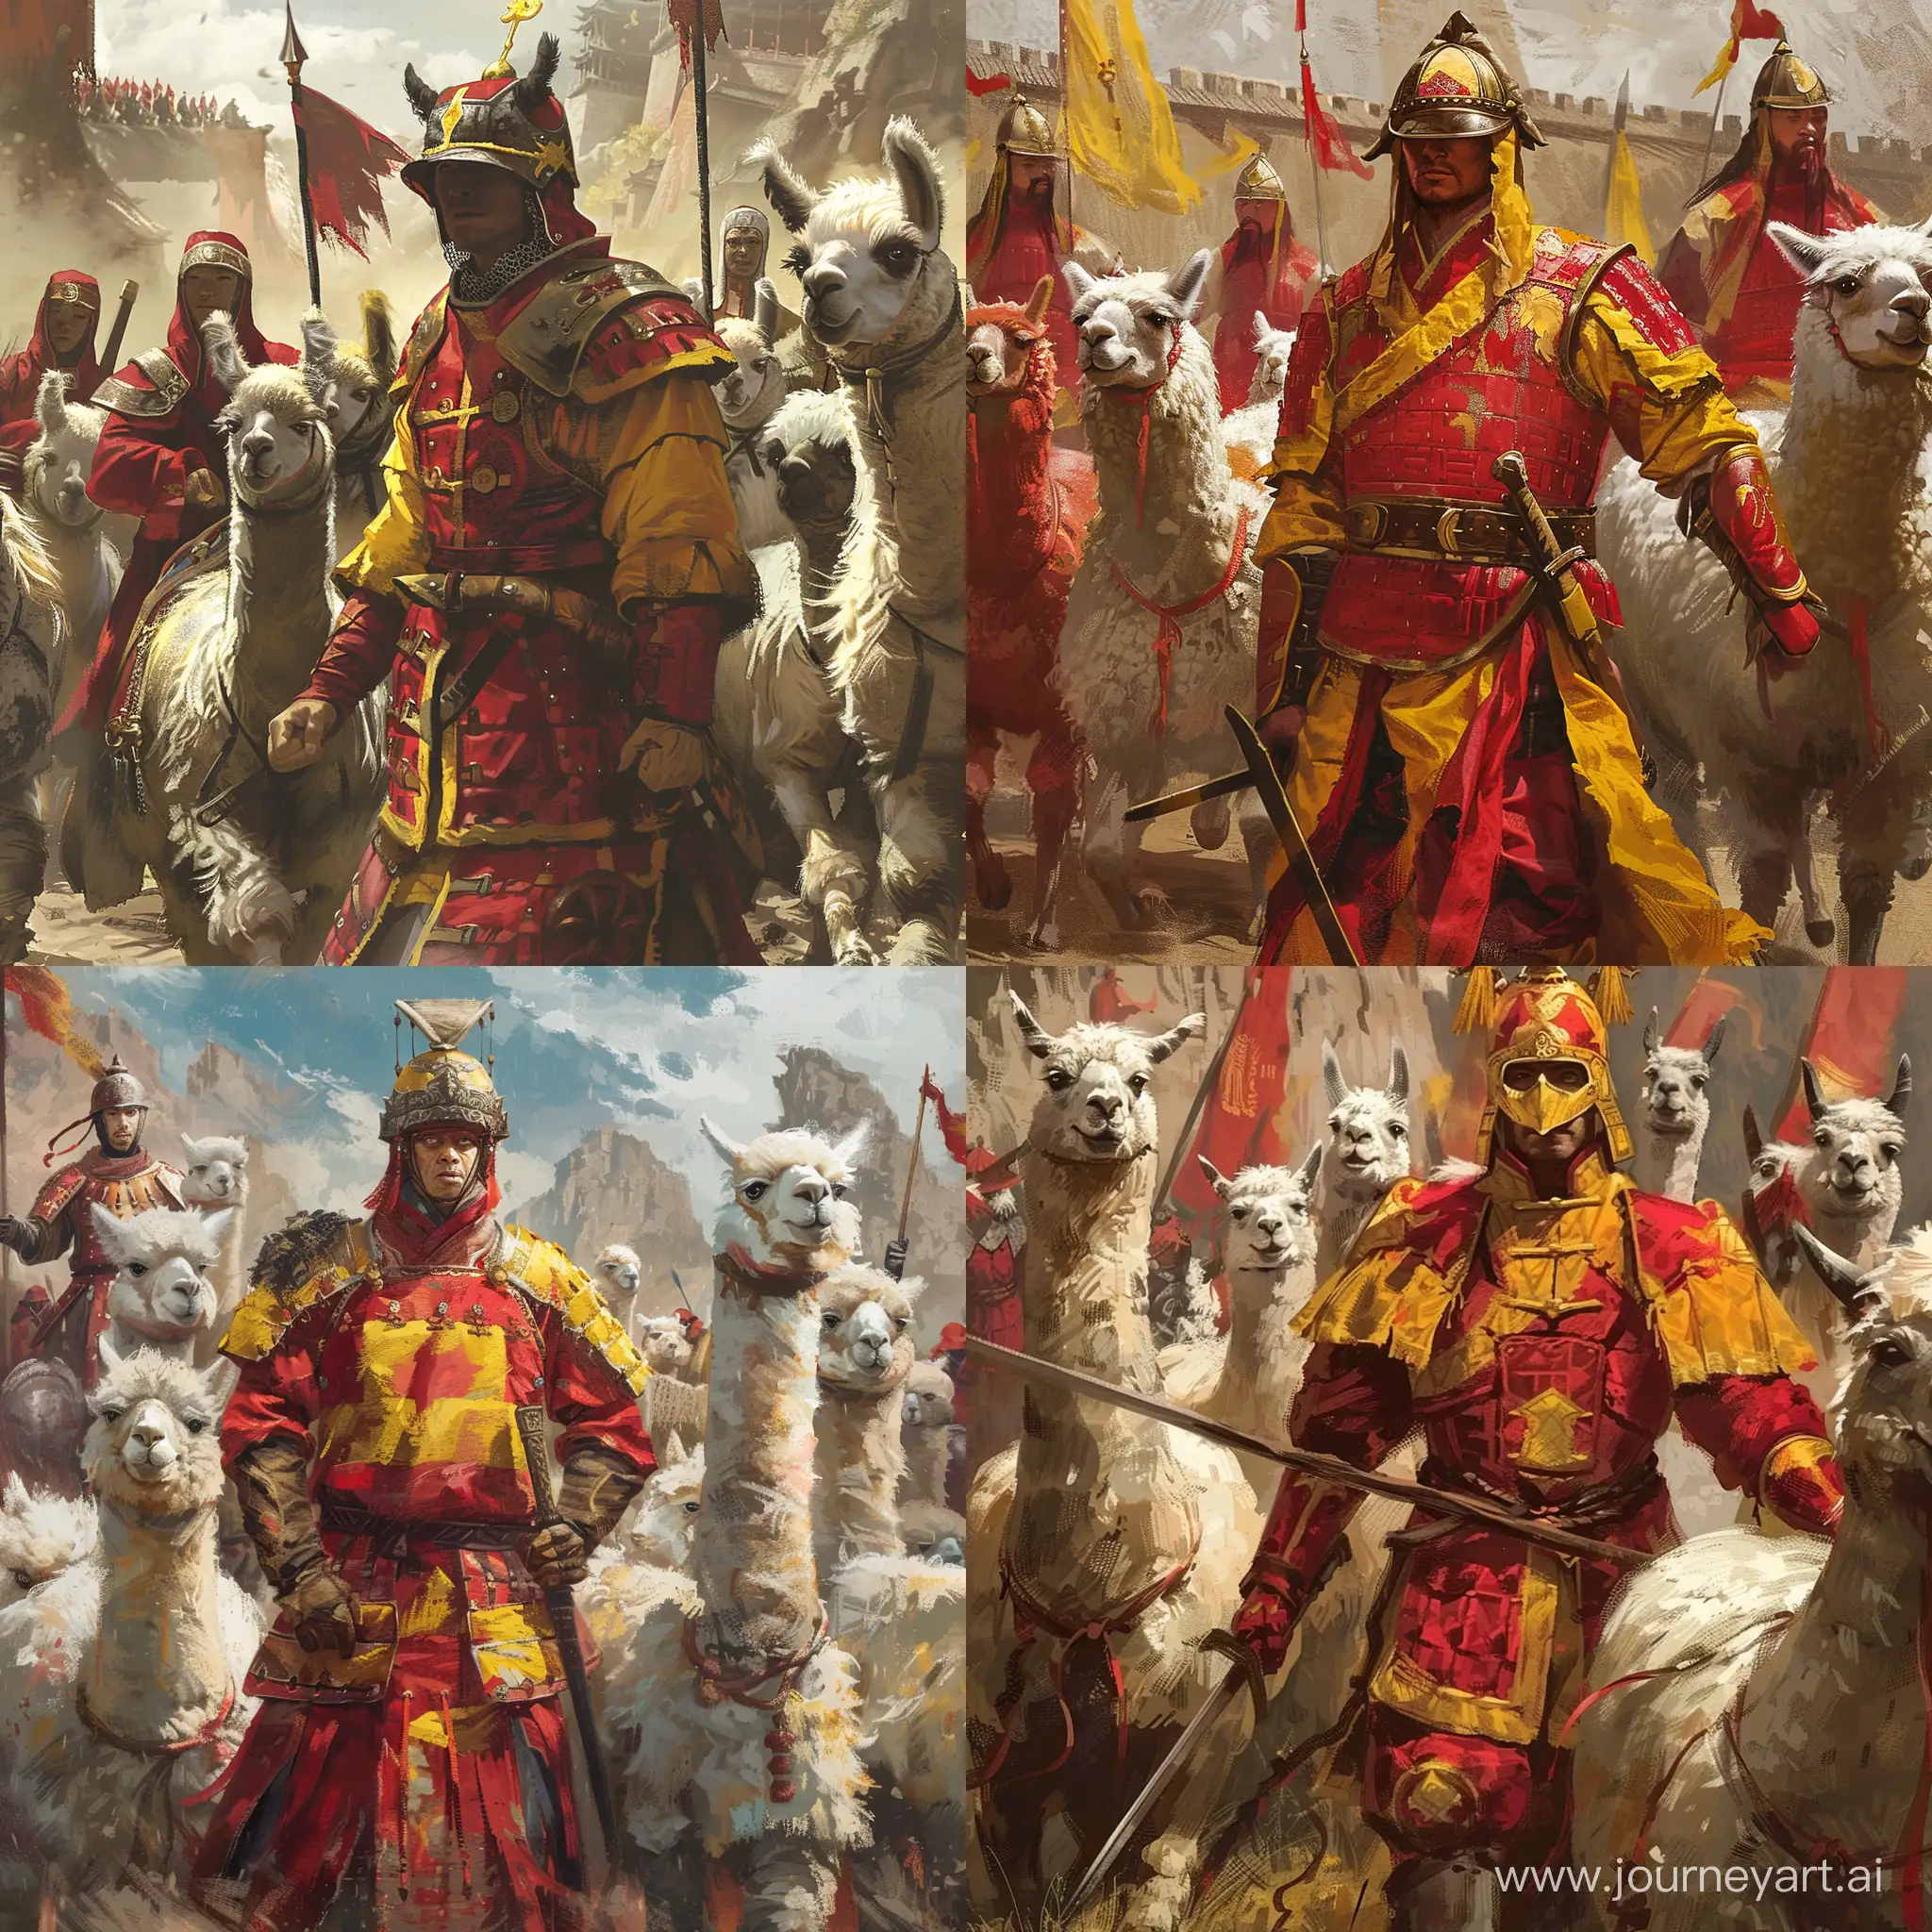 Medieval-Chinese-Soldier-Herding-Alpaca-Warriors-in-Red-and-Yellow-Armor